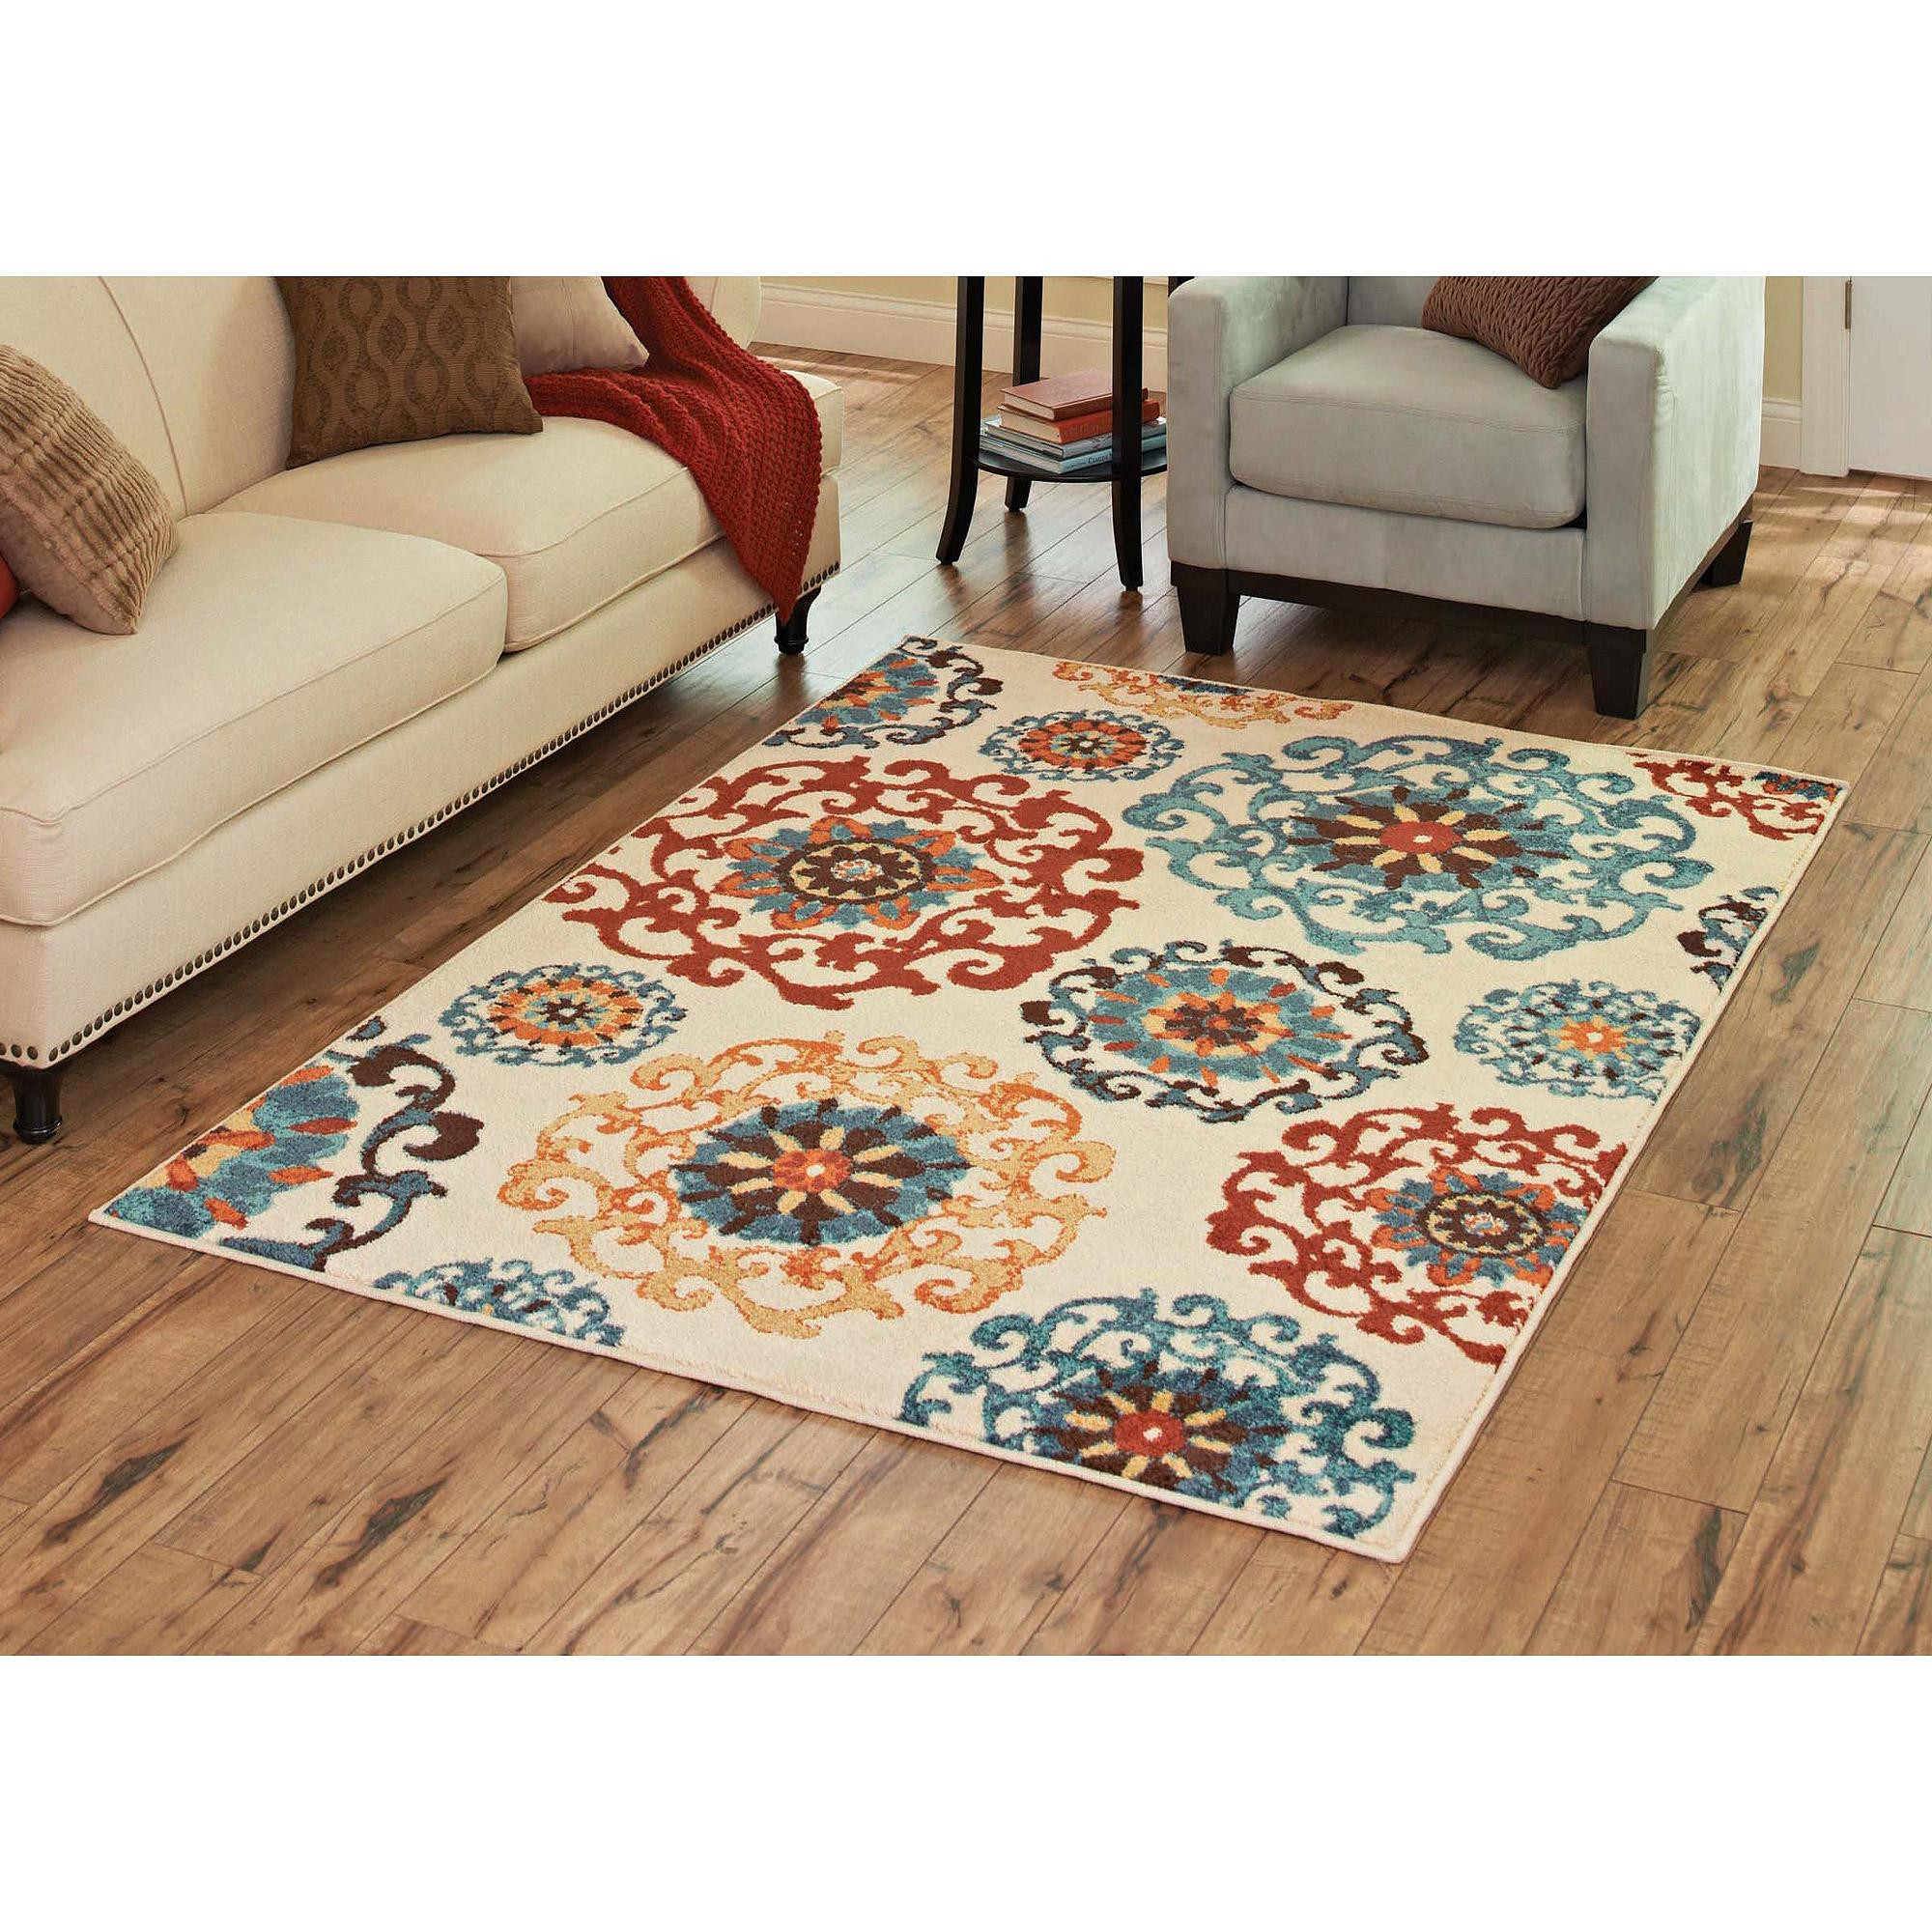 Target Living Room Rugs
 Floor How To Decorate Cool Flooring With Lowes Area Rugs